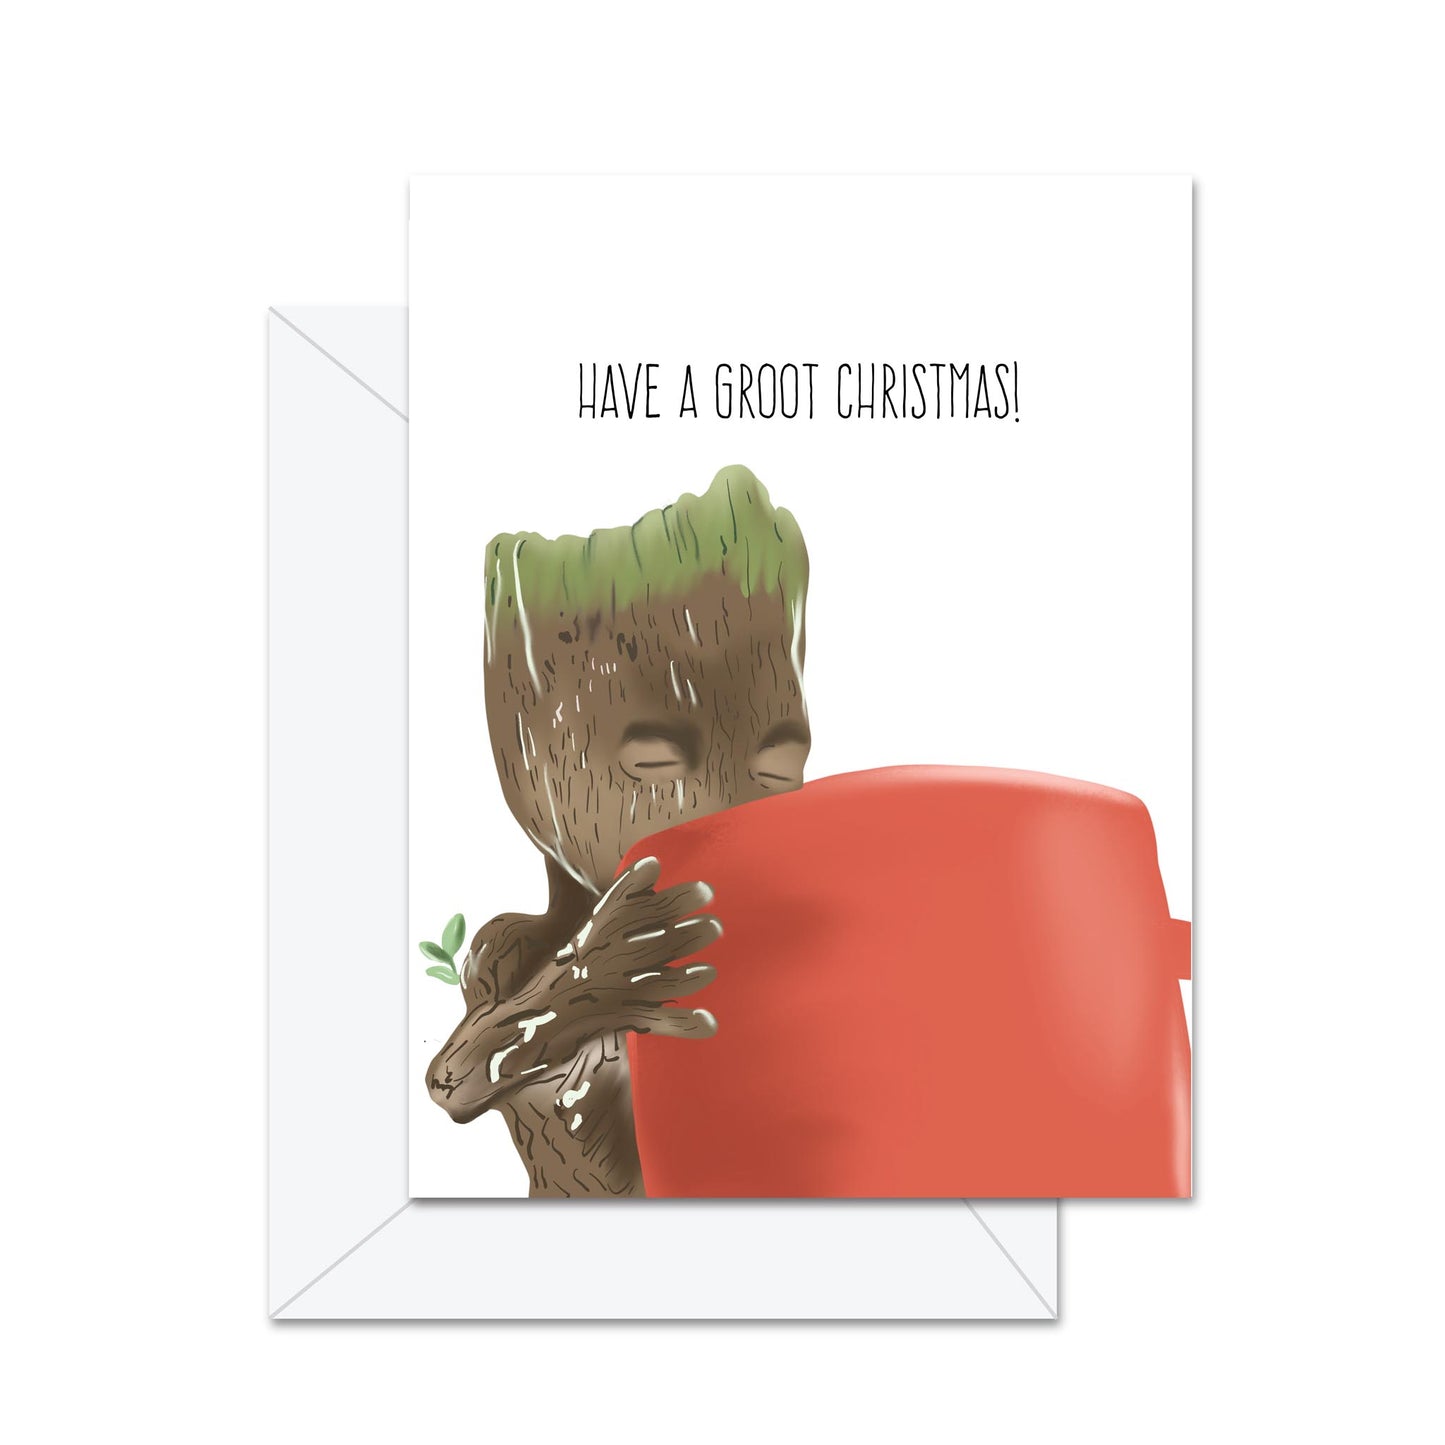 Have A Groot Christmas! - Greeting Card